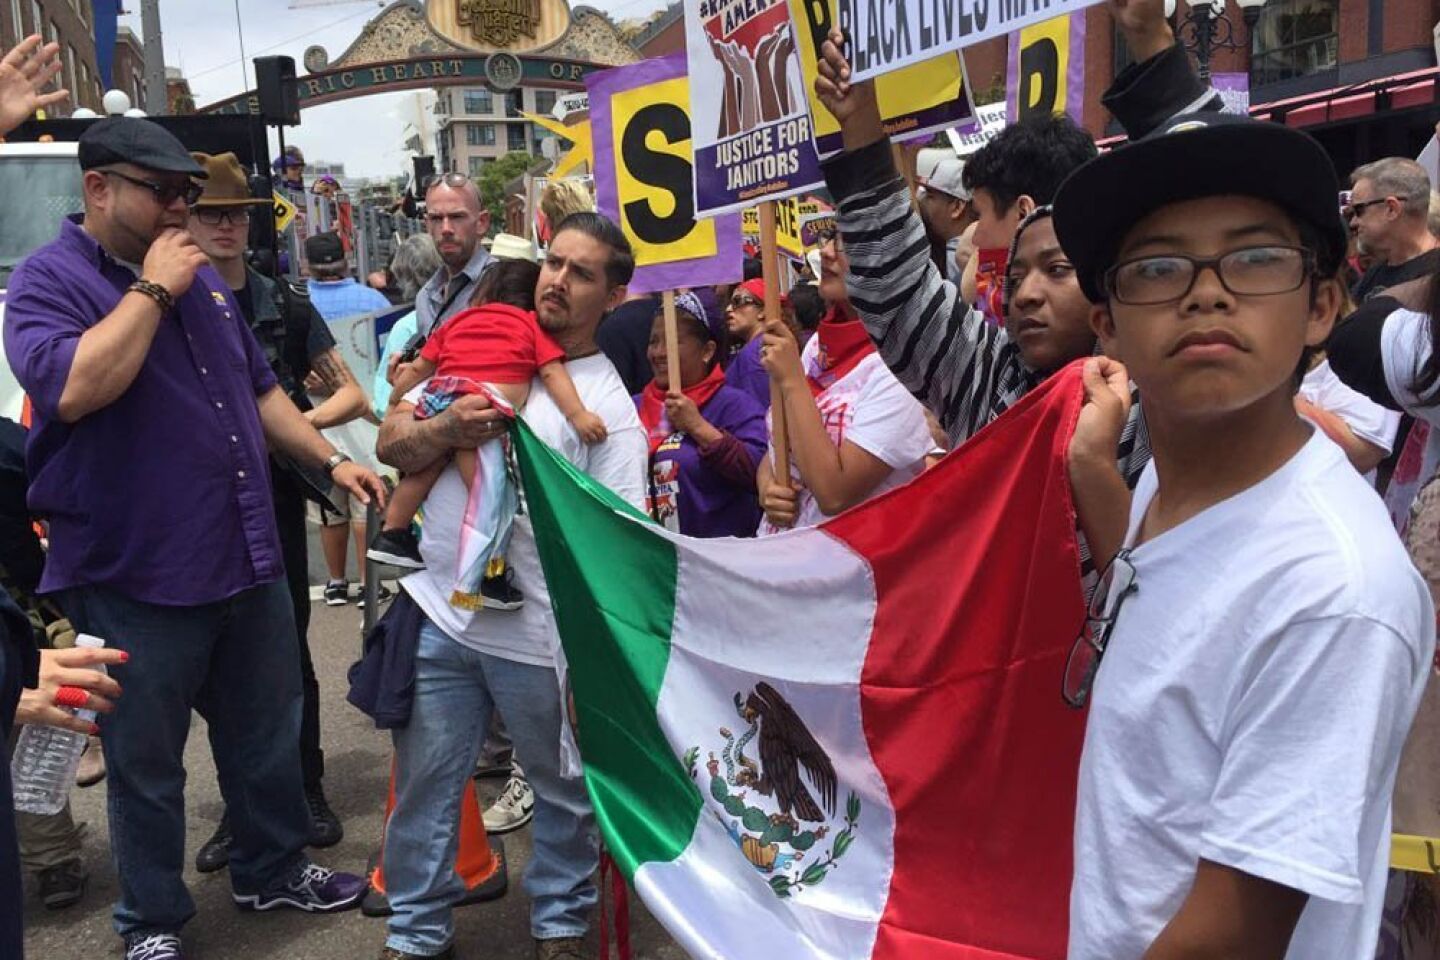 Things have become a little intense with arrival of janitors union marchers #SDTrumpRally rally in San Diego.